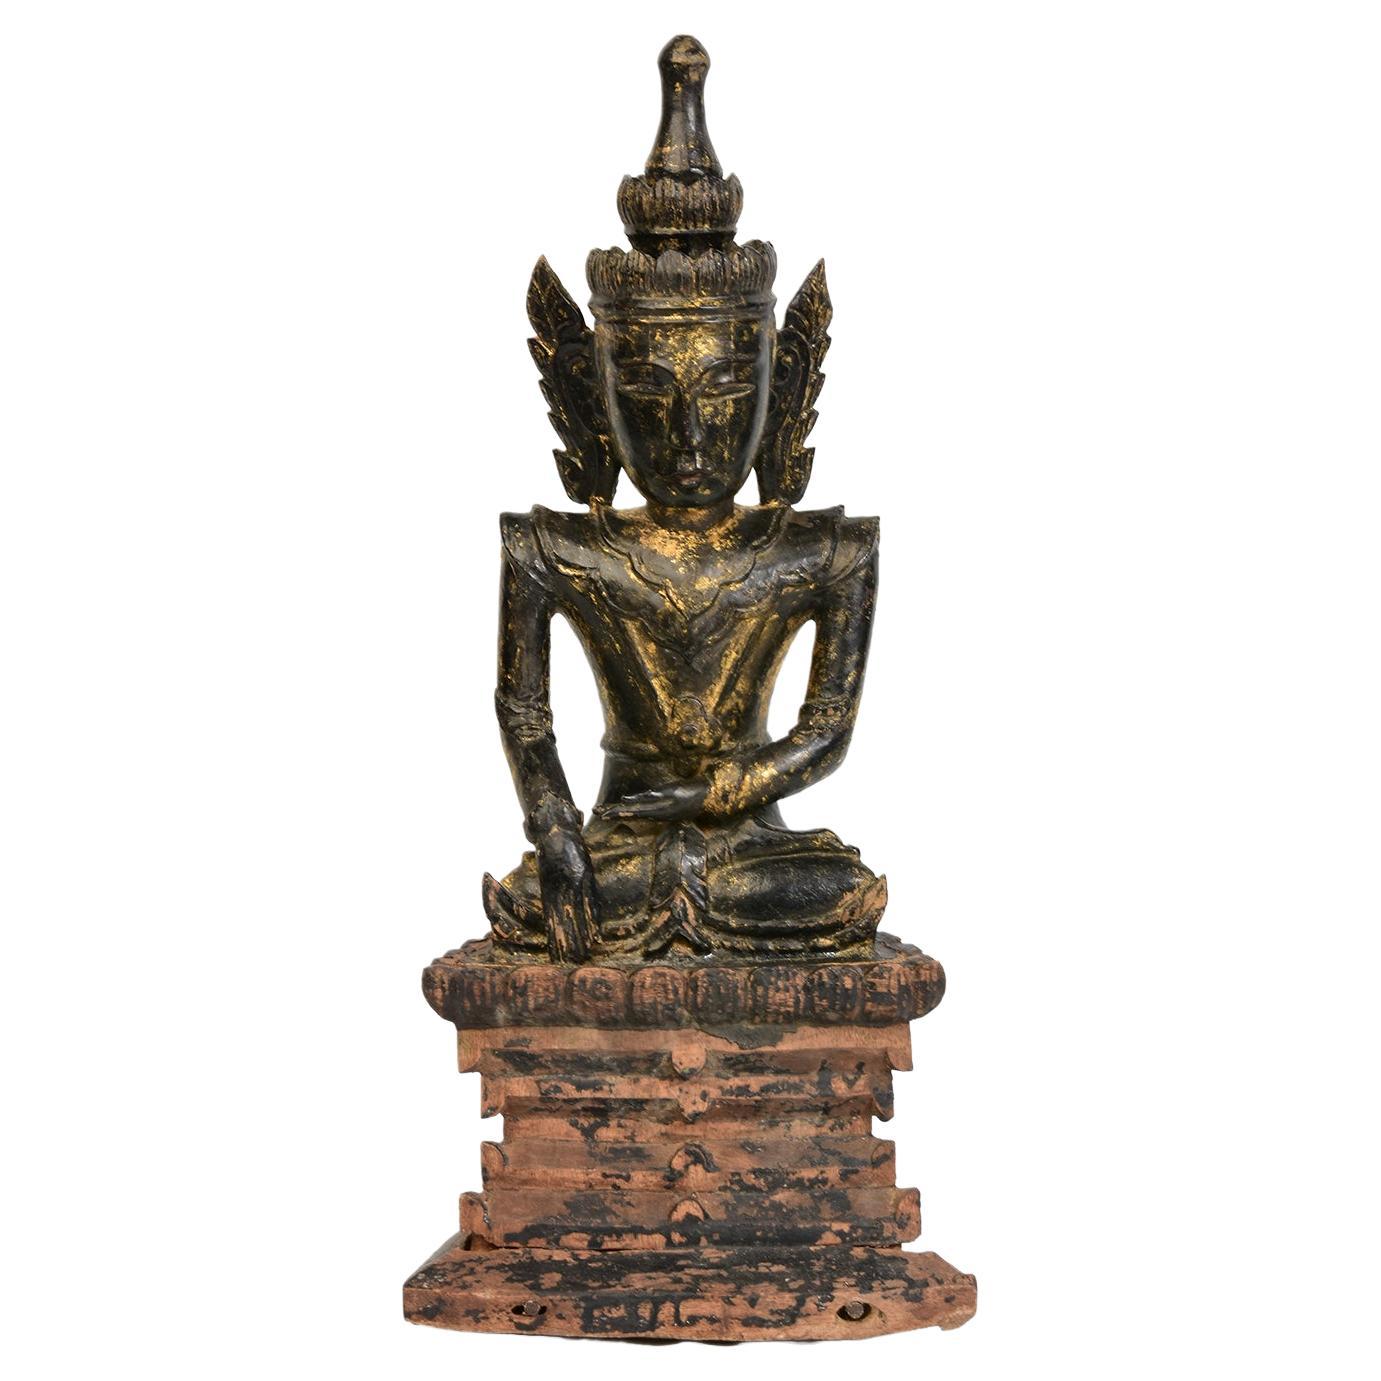 18th Century, Shan, Antique Burmese Wooden Seated Crowned Buddha